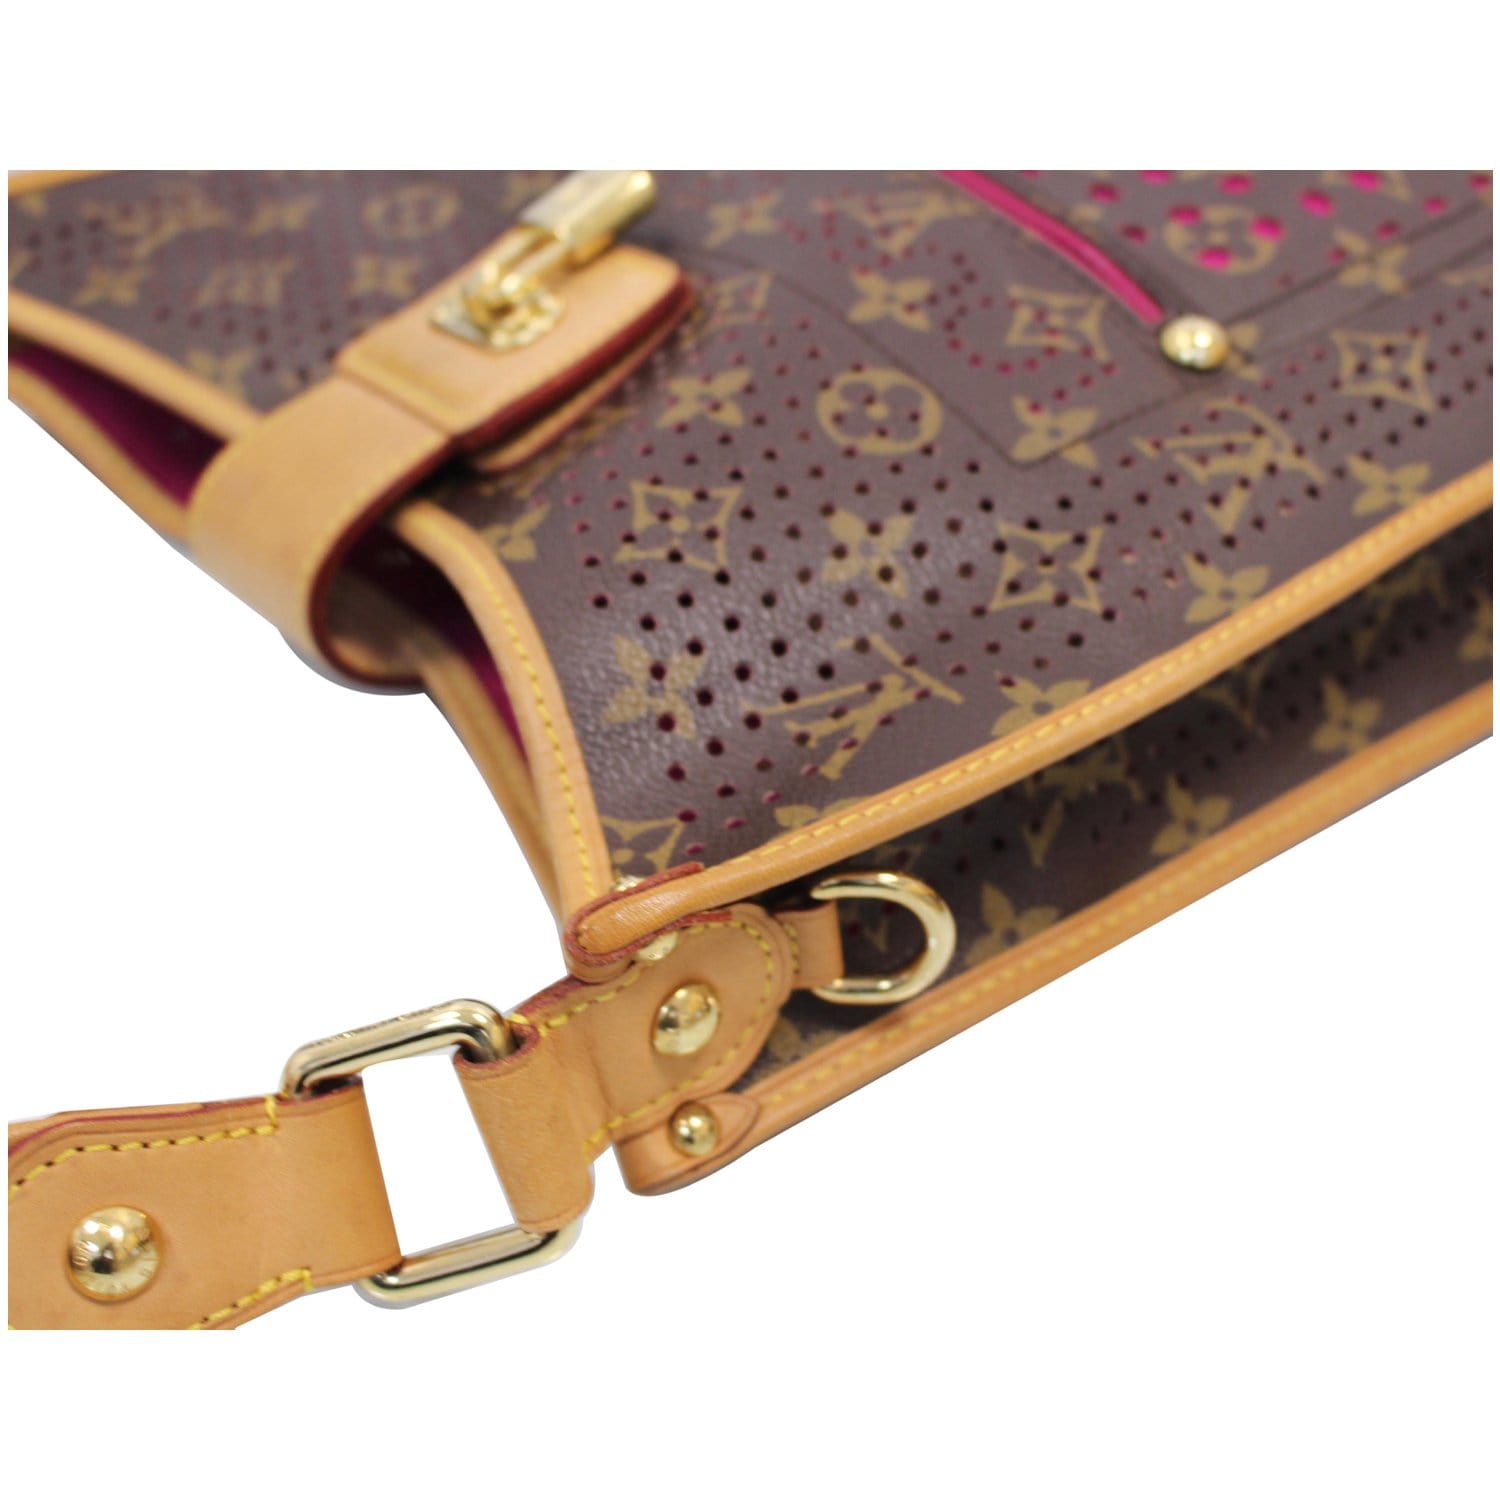 Louis Vuitton Perforated Accessories Monogram Canvas Leather Handbag - 2006  Limited